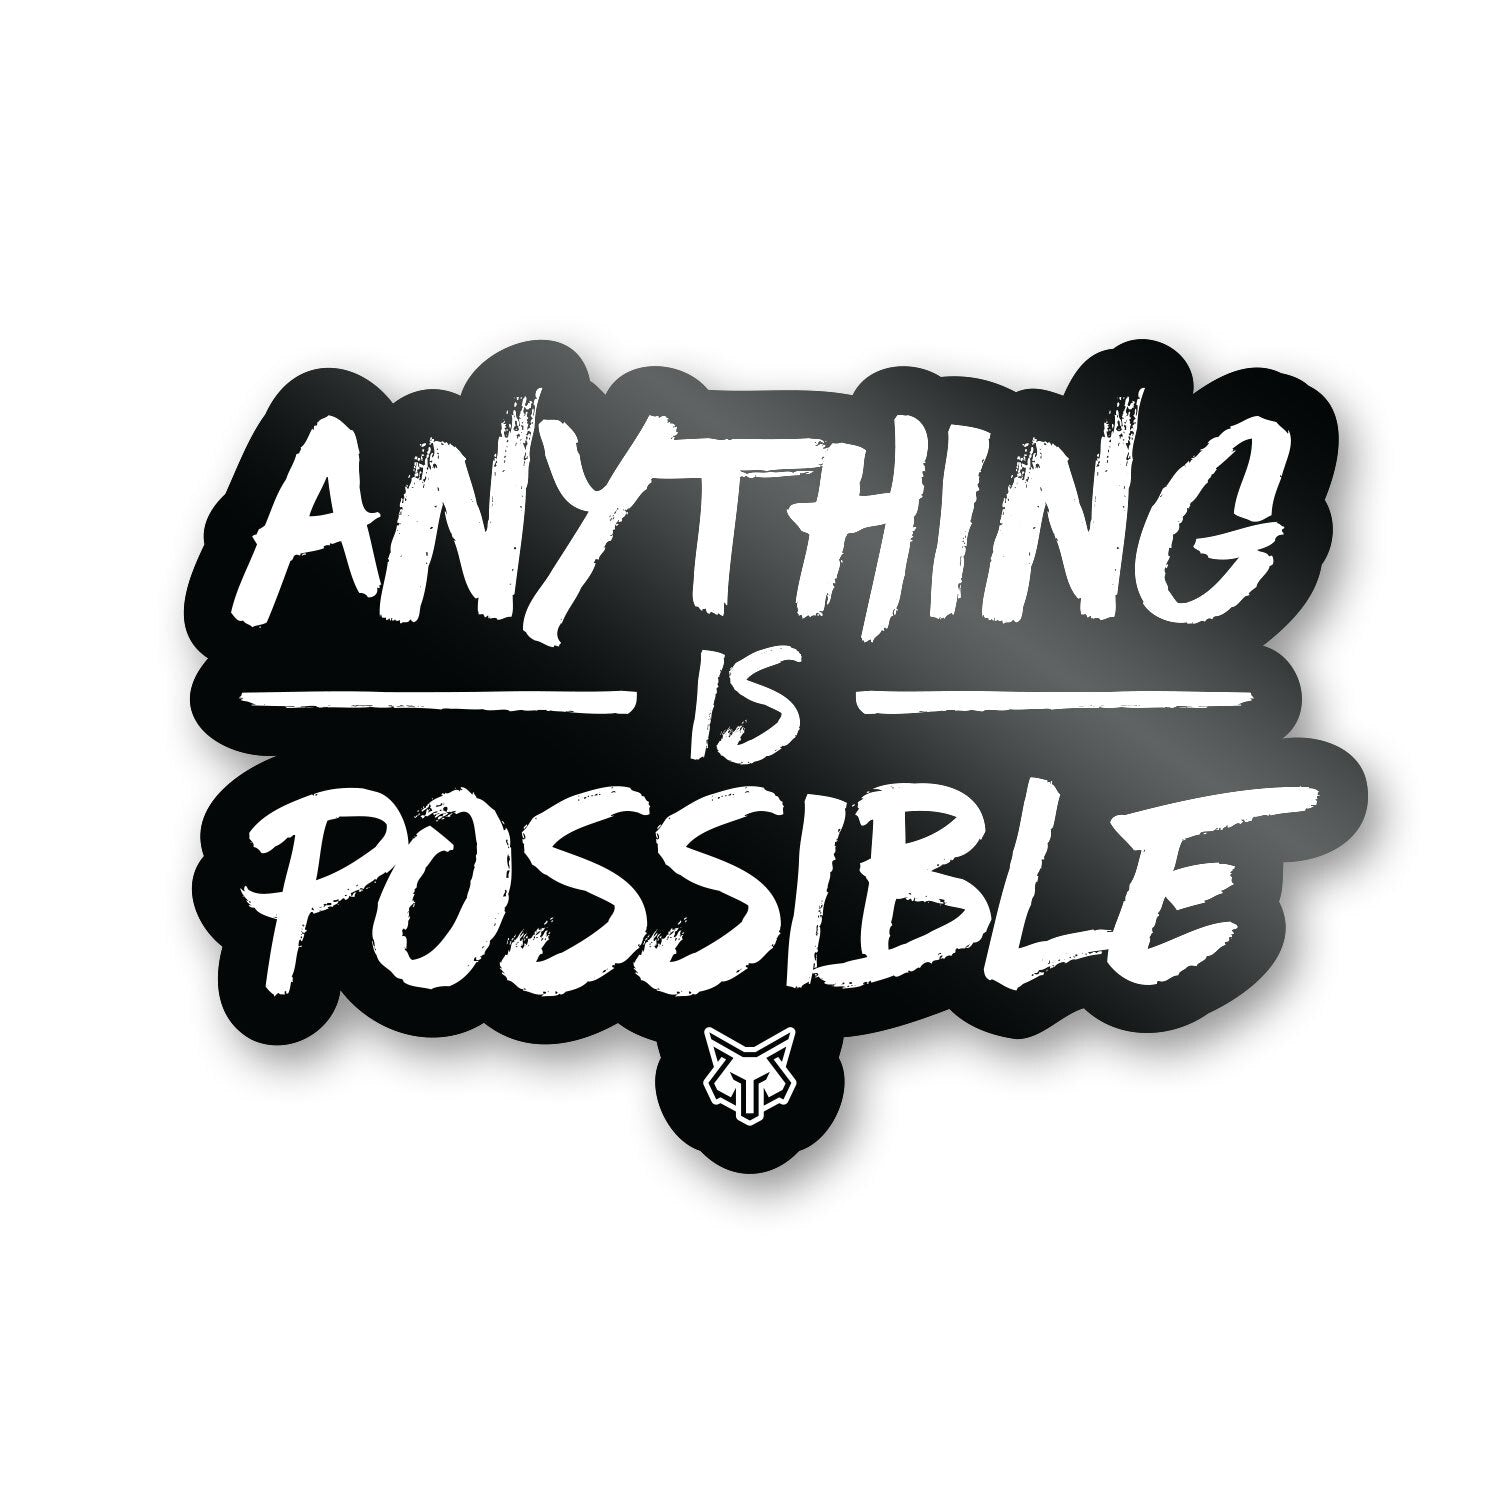 ANYTHING IS POSSIBLE STICKER - TakeShots